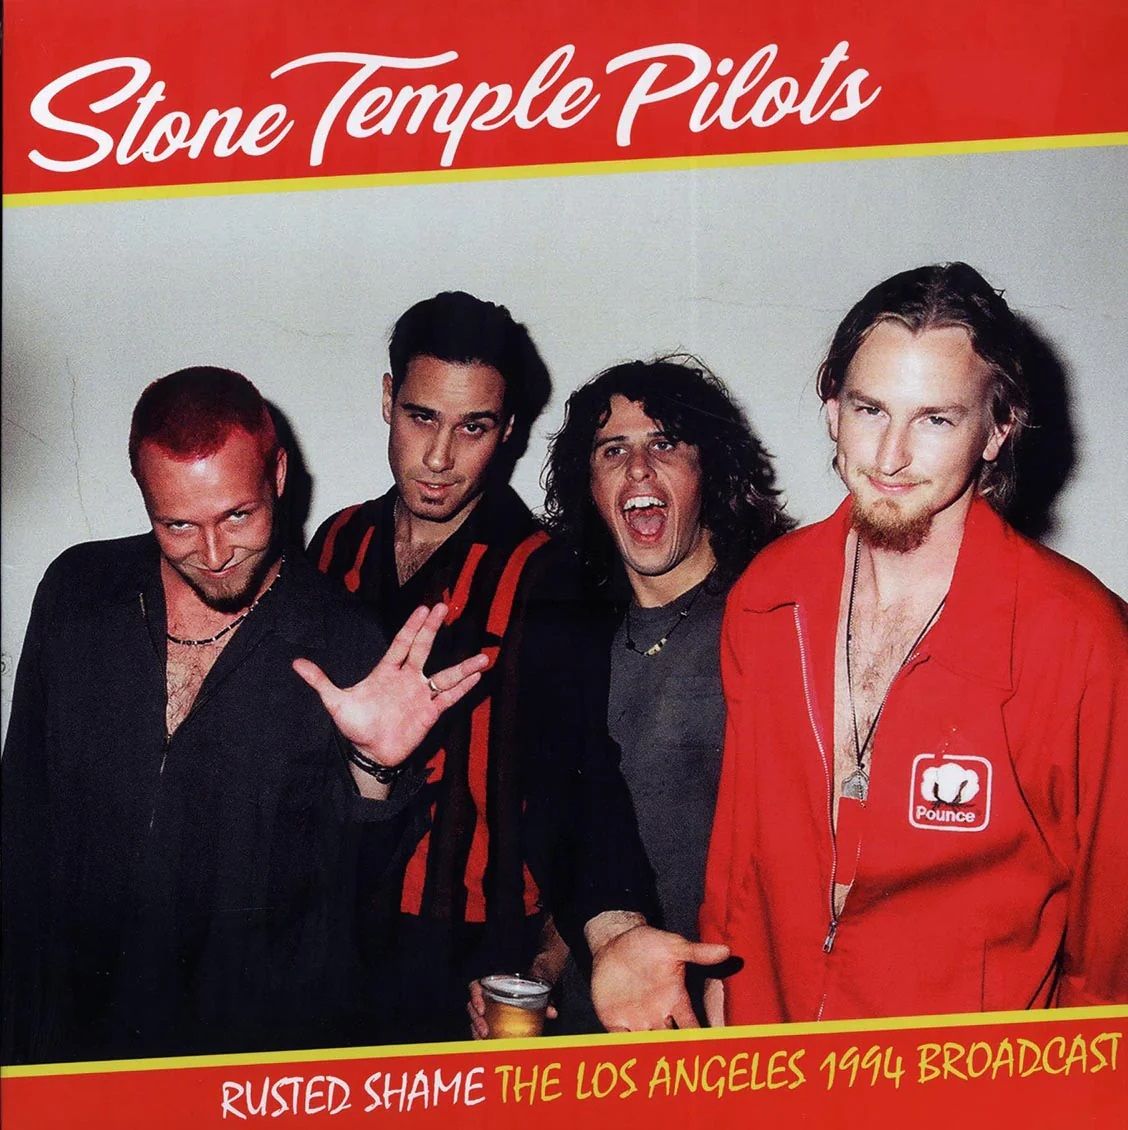 Stone Temple Pilots - Rusted Shame: The Los Angeles 1994 Broadcast (Ltd. Ed. of 500) - Vinyl - New